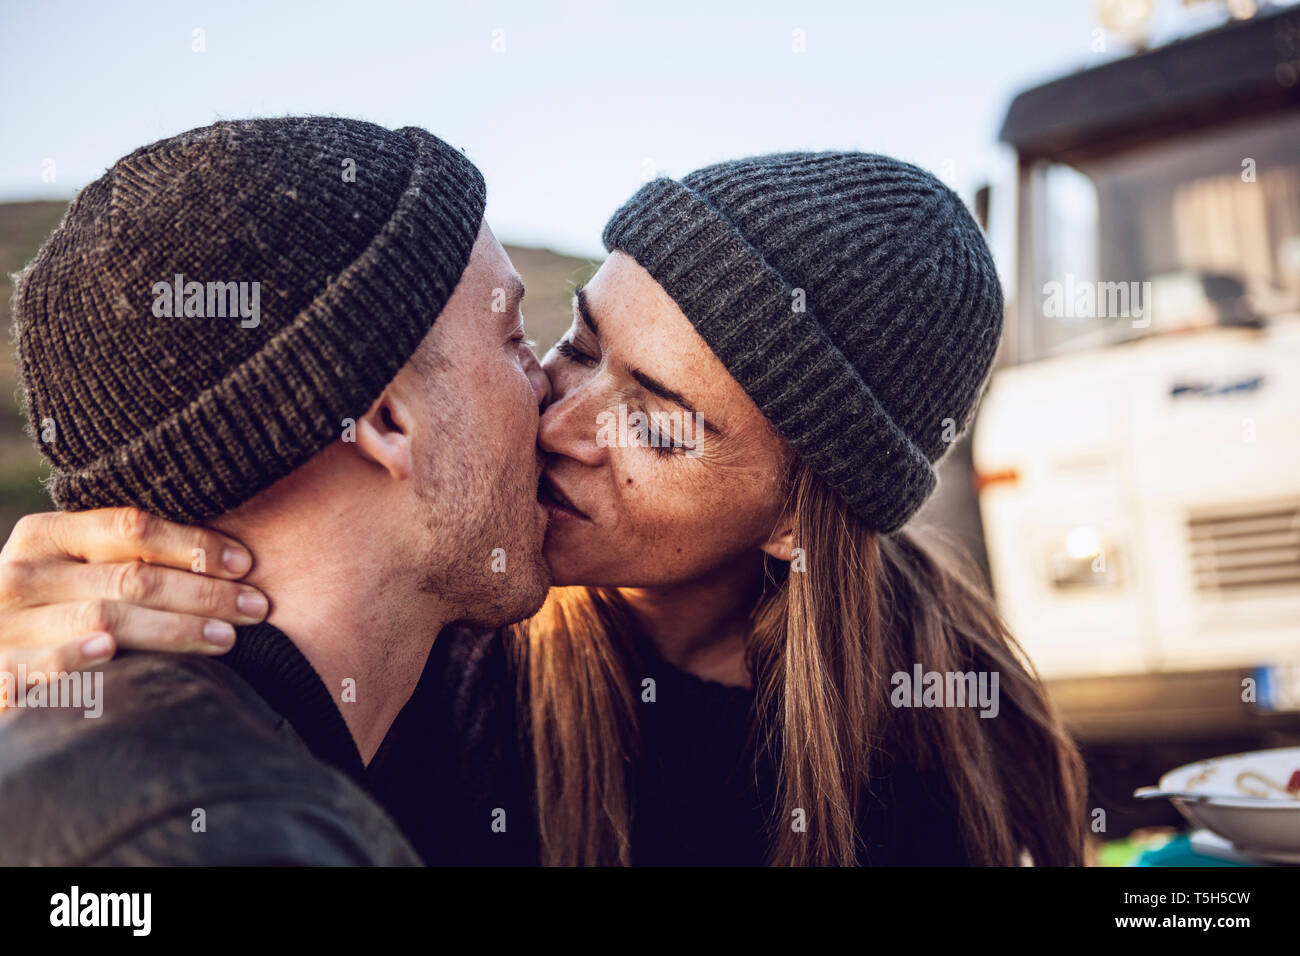 Kissing couple wearing wooly hats Stock Photo - Alamy